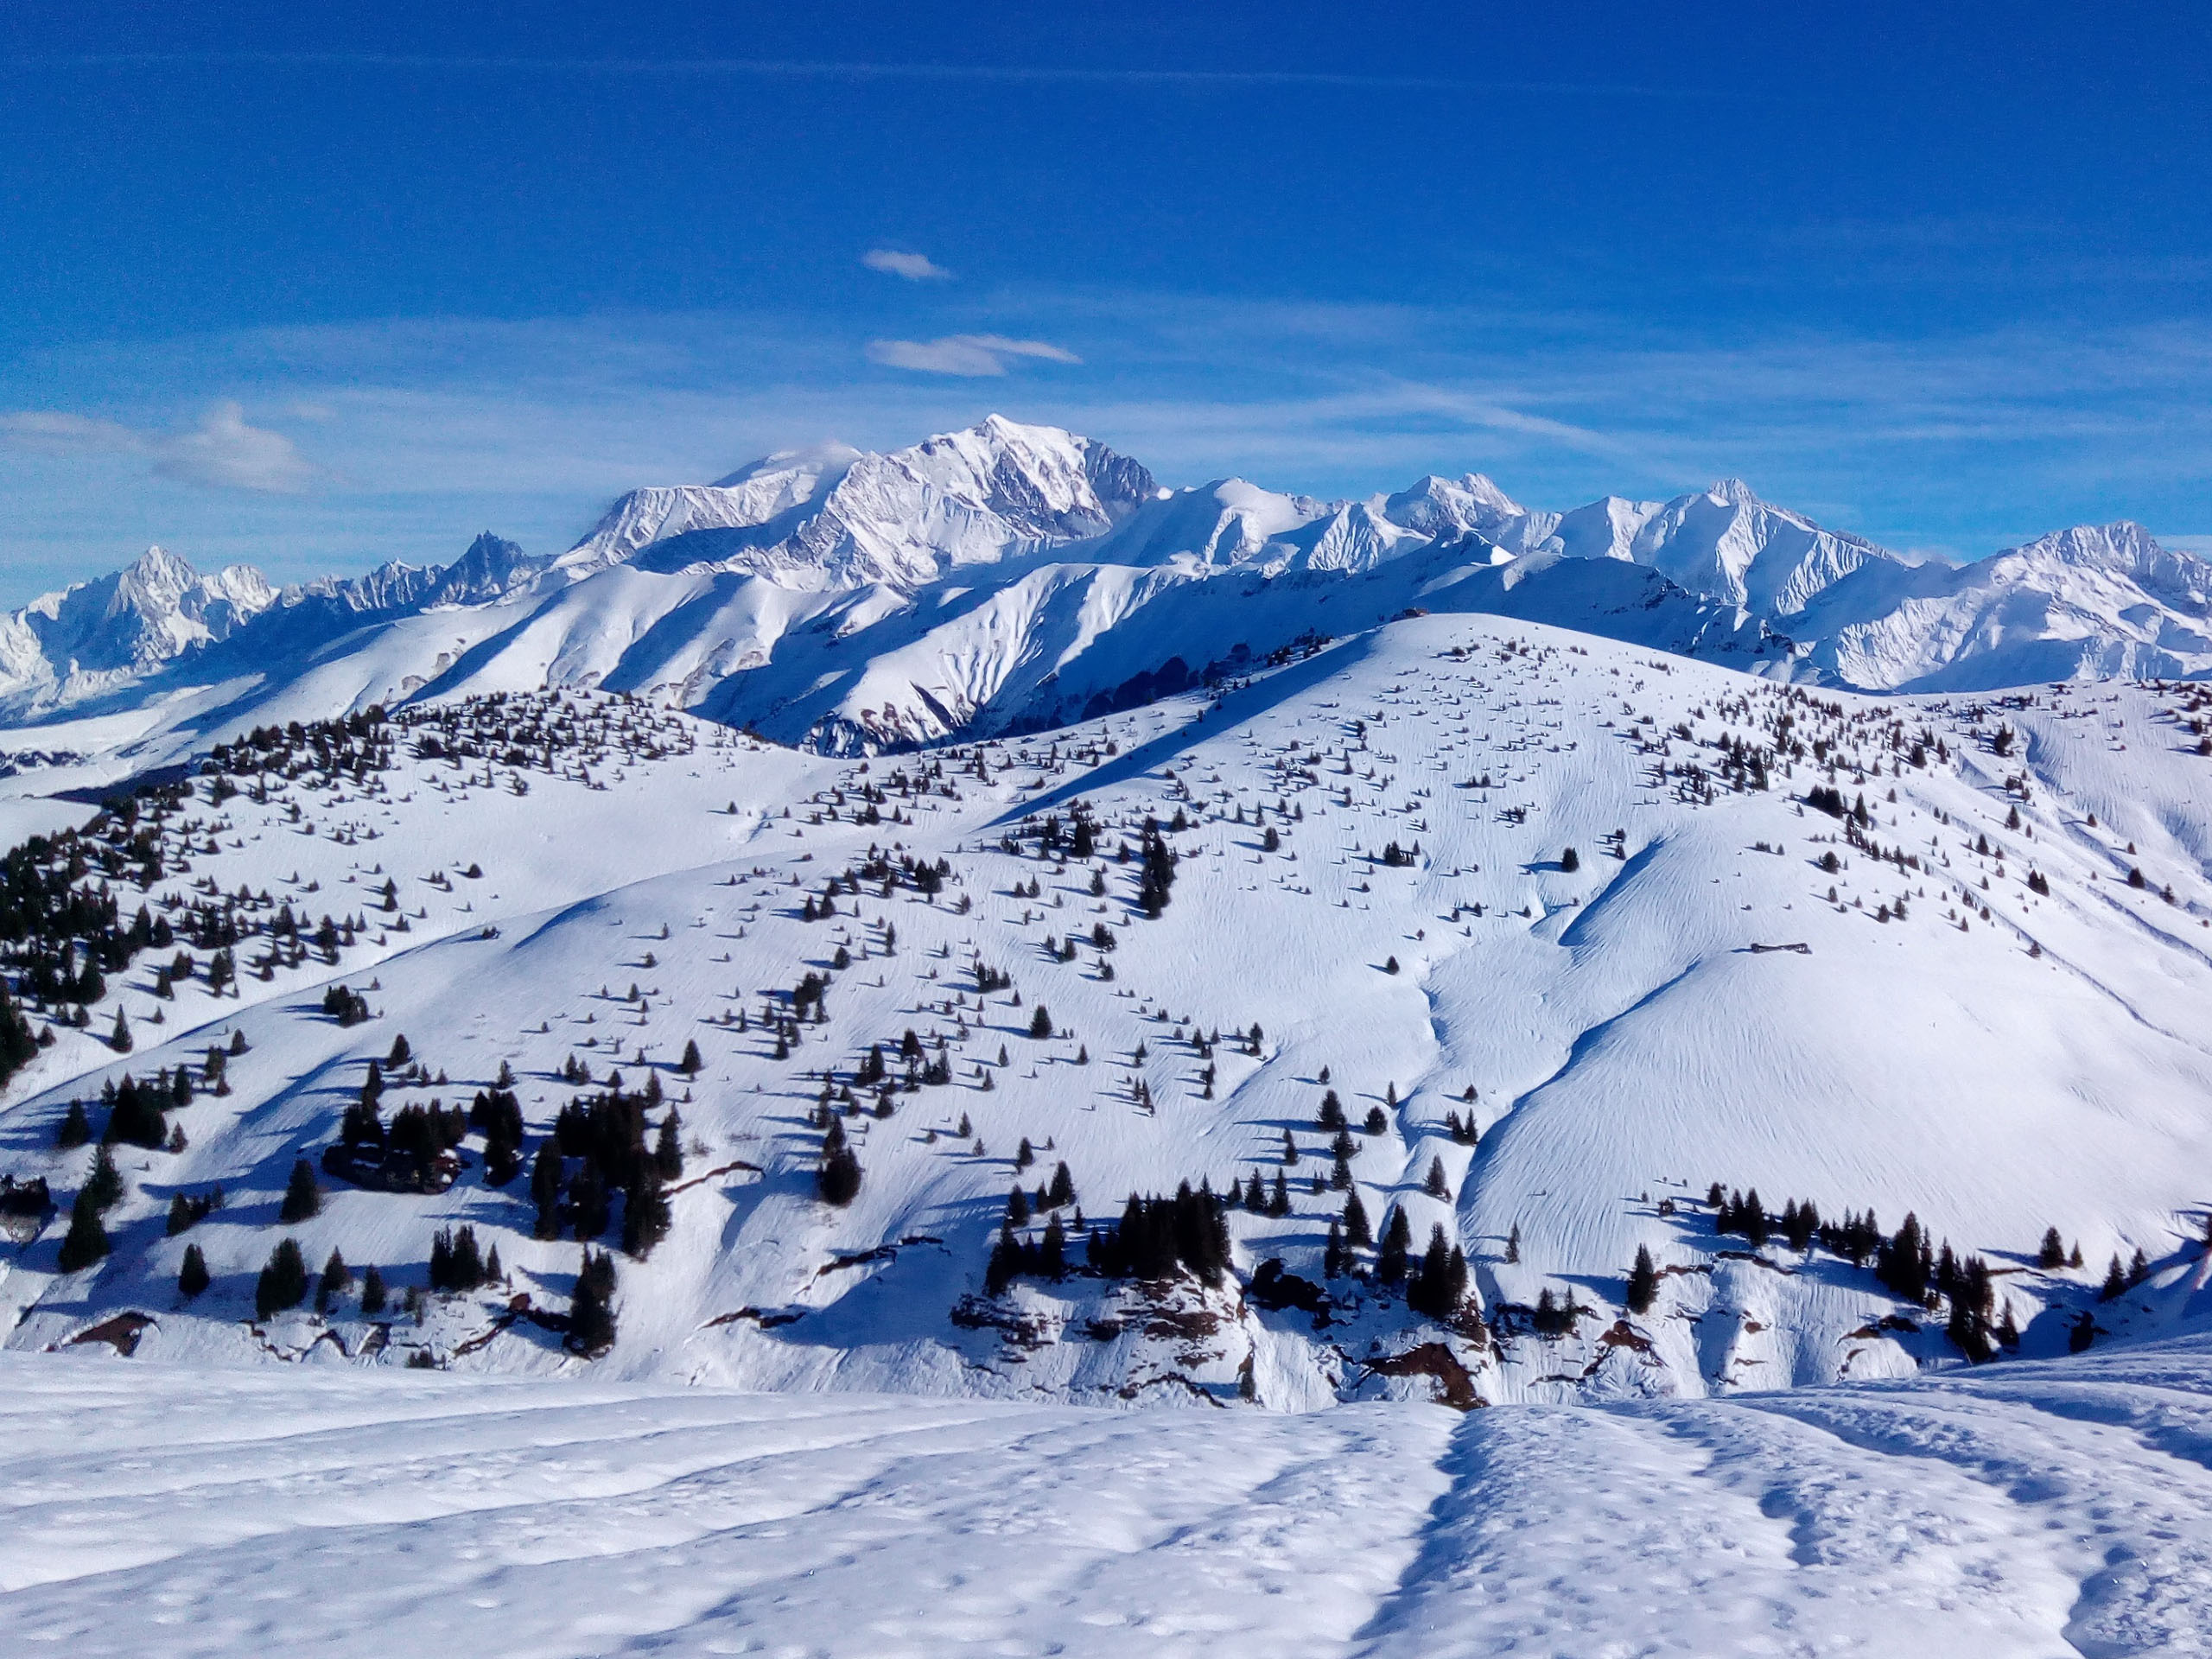 Tour du Mont Blanc - fantastic skiing conditions in the earlt months of spring